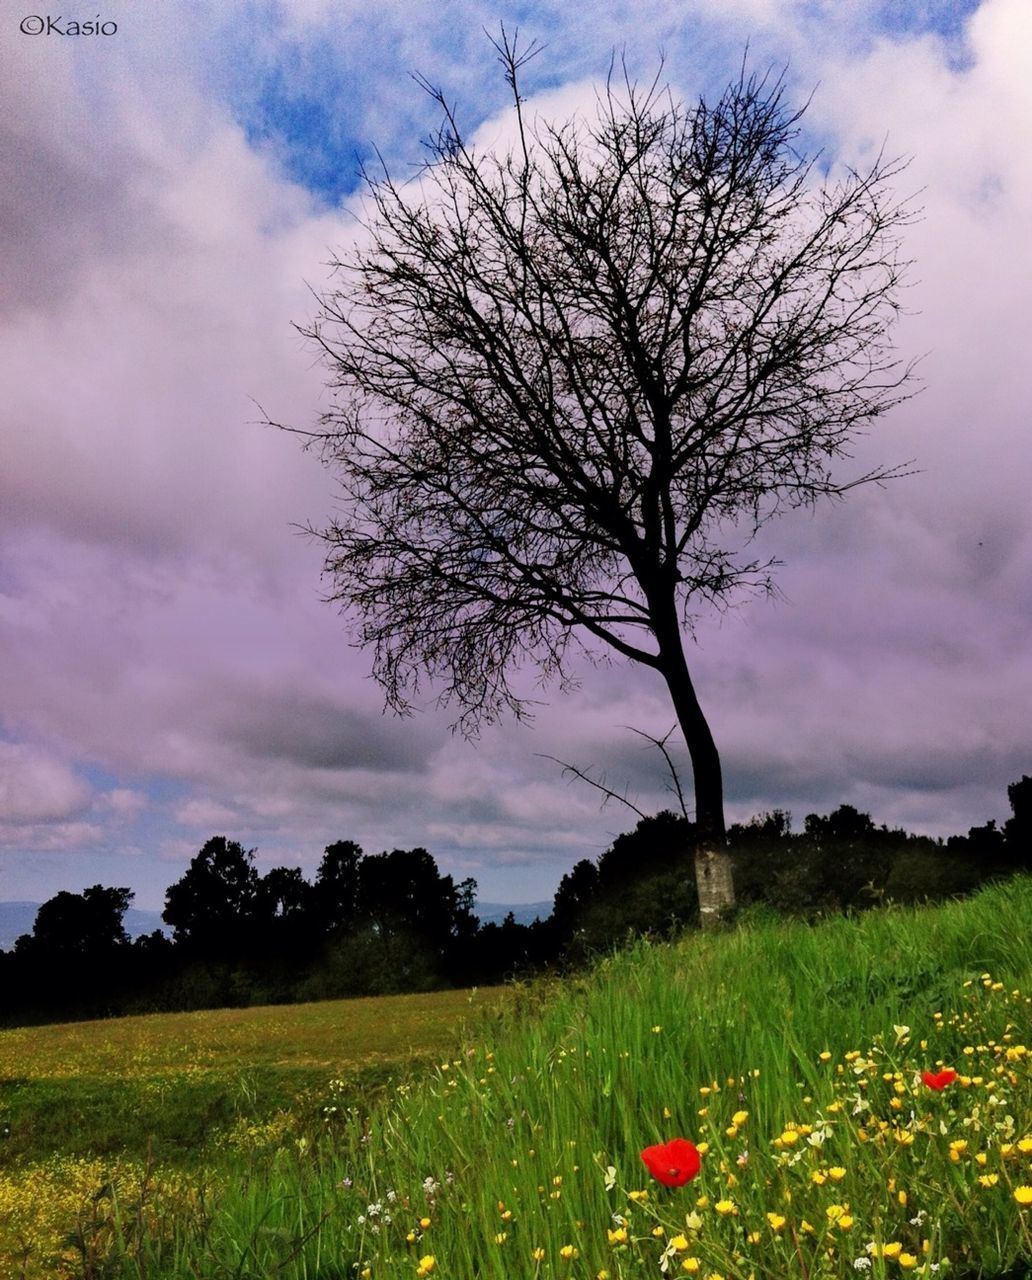 sky, field, flower, tree, landscape, tranquility, tranquil scene, cloud - sky, growth, beauty in nature, nature, grass, scenics, rural scene, cloudy, cloud, agriculture, plant, freshness, non-urban scene